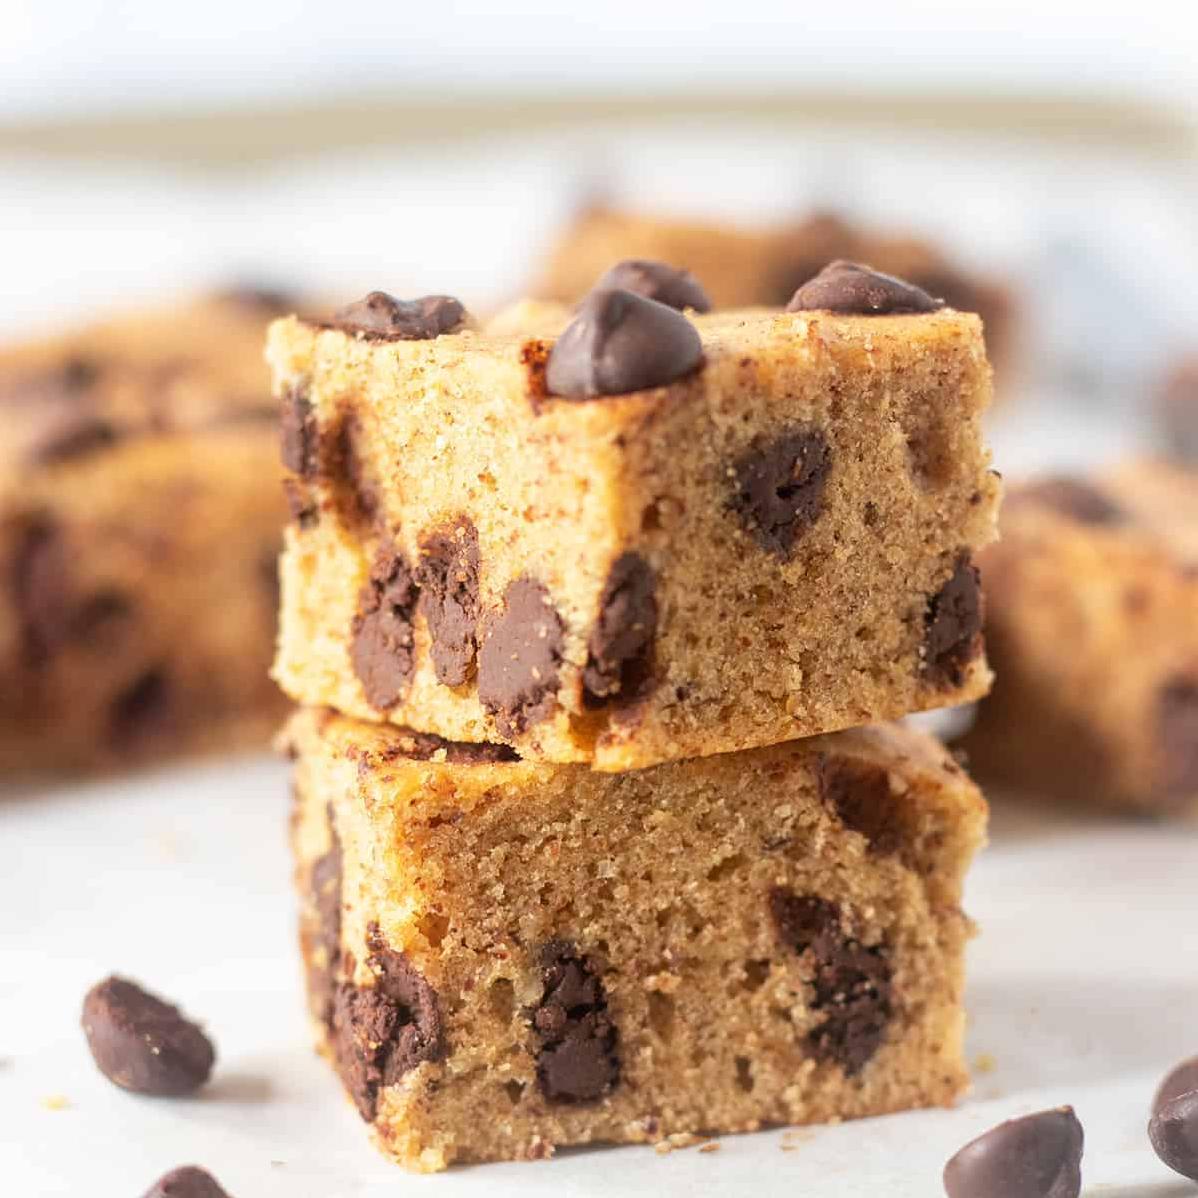  The chewy texture and rich flavor of these chocolate chip cookies/bars will make you forget all about the gluten and dairy.